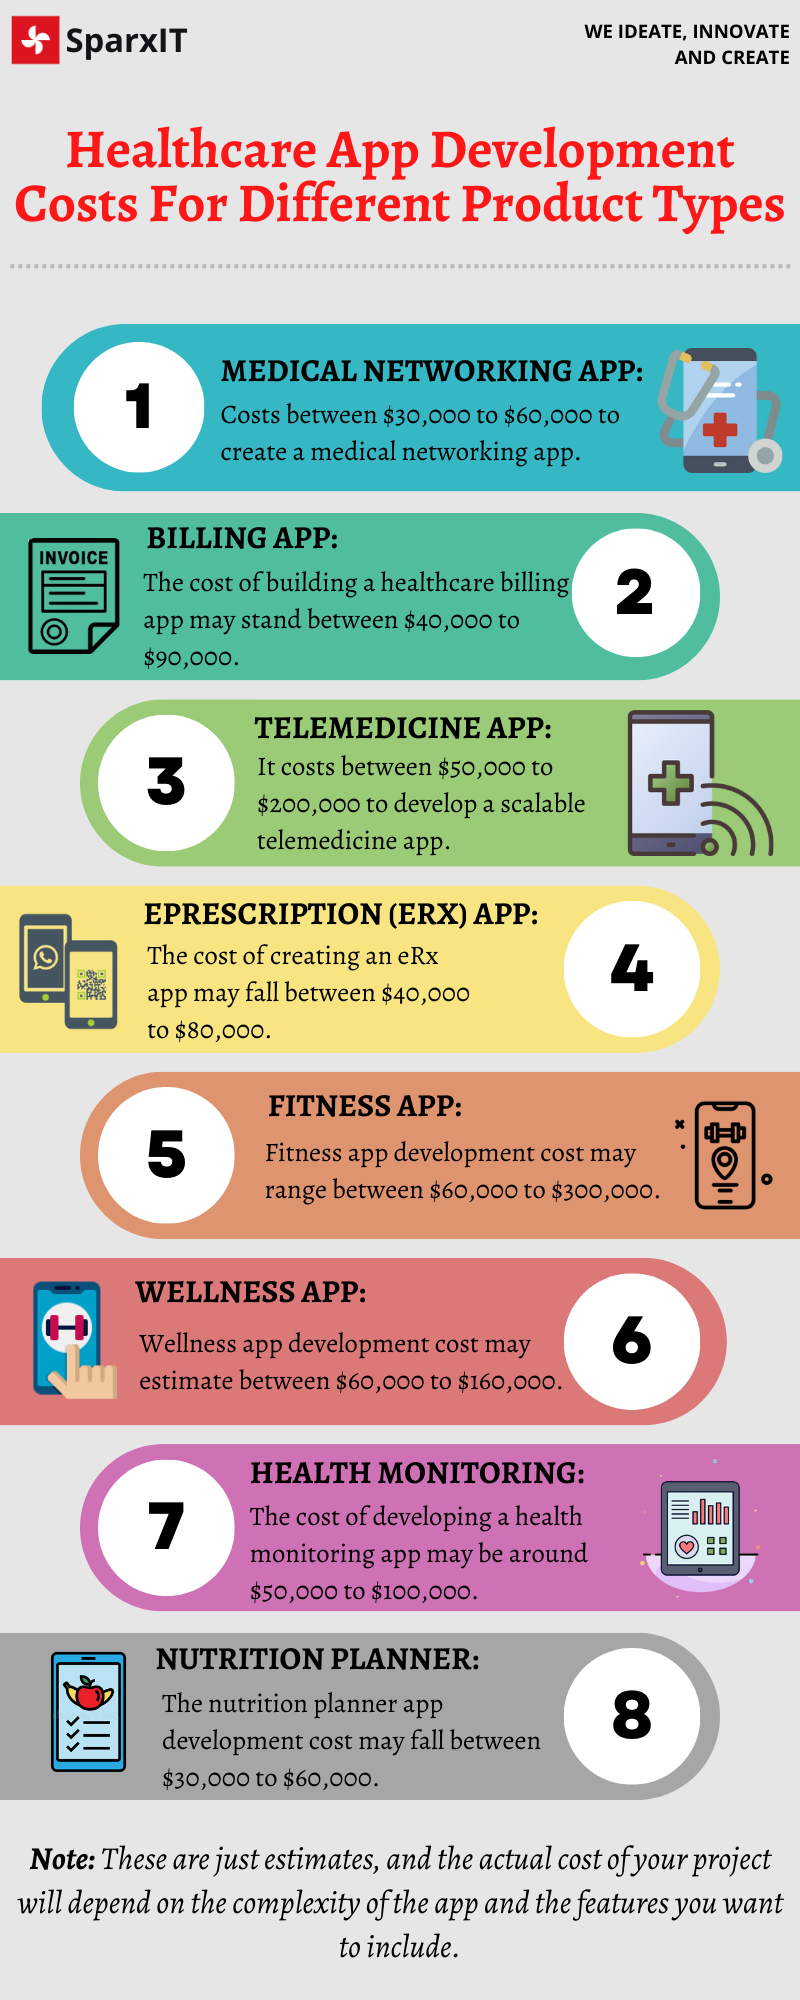 Healthcare App Development Costs For Different Product Types